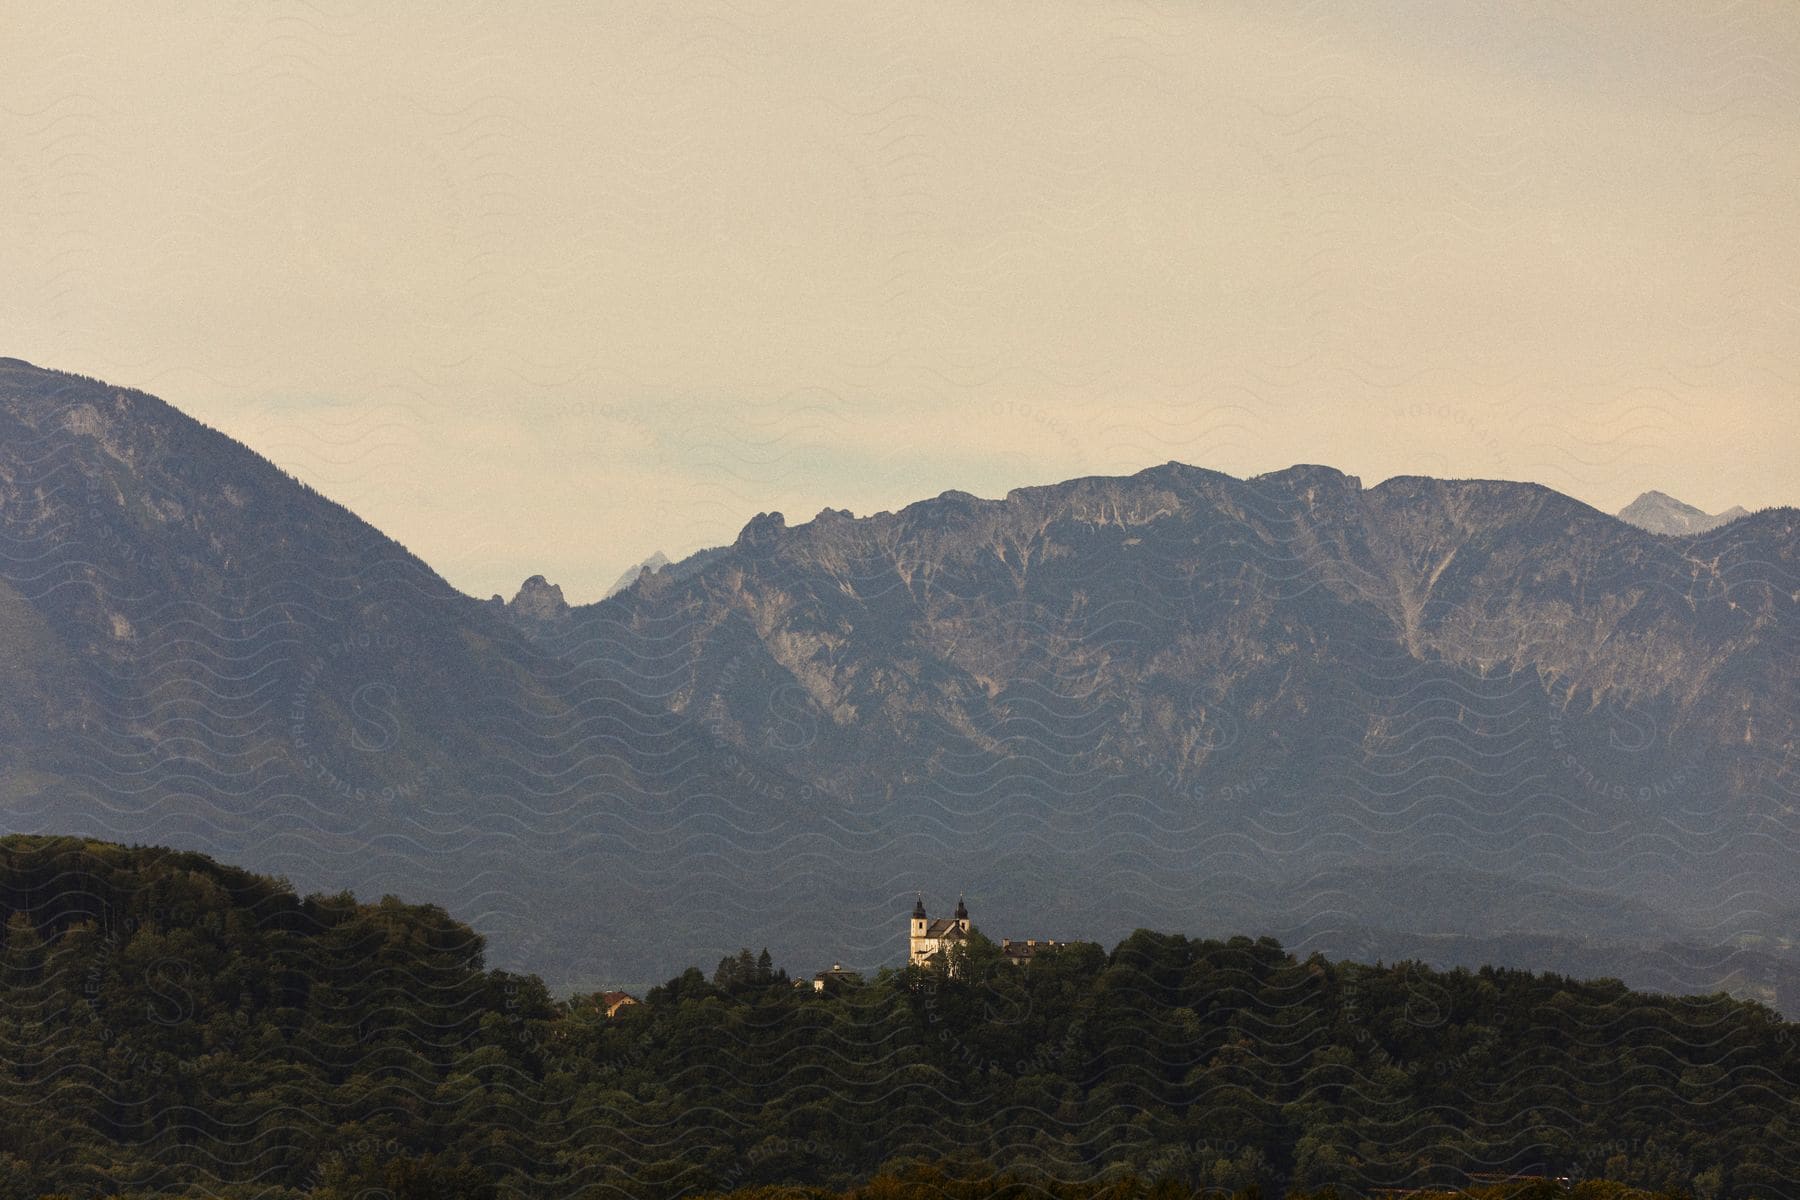 Castle at the edge of a forest overlooking mountains in the distance